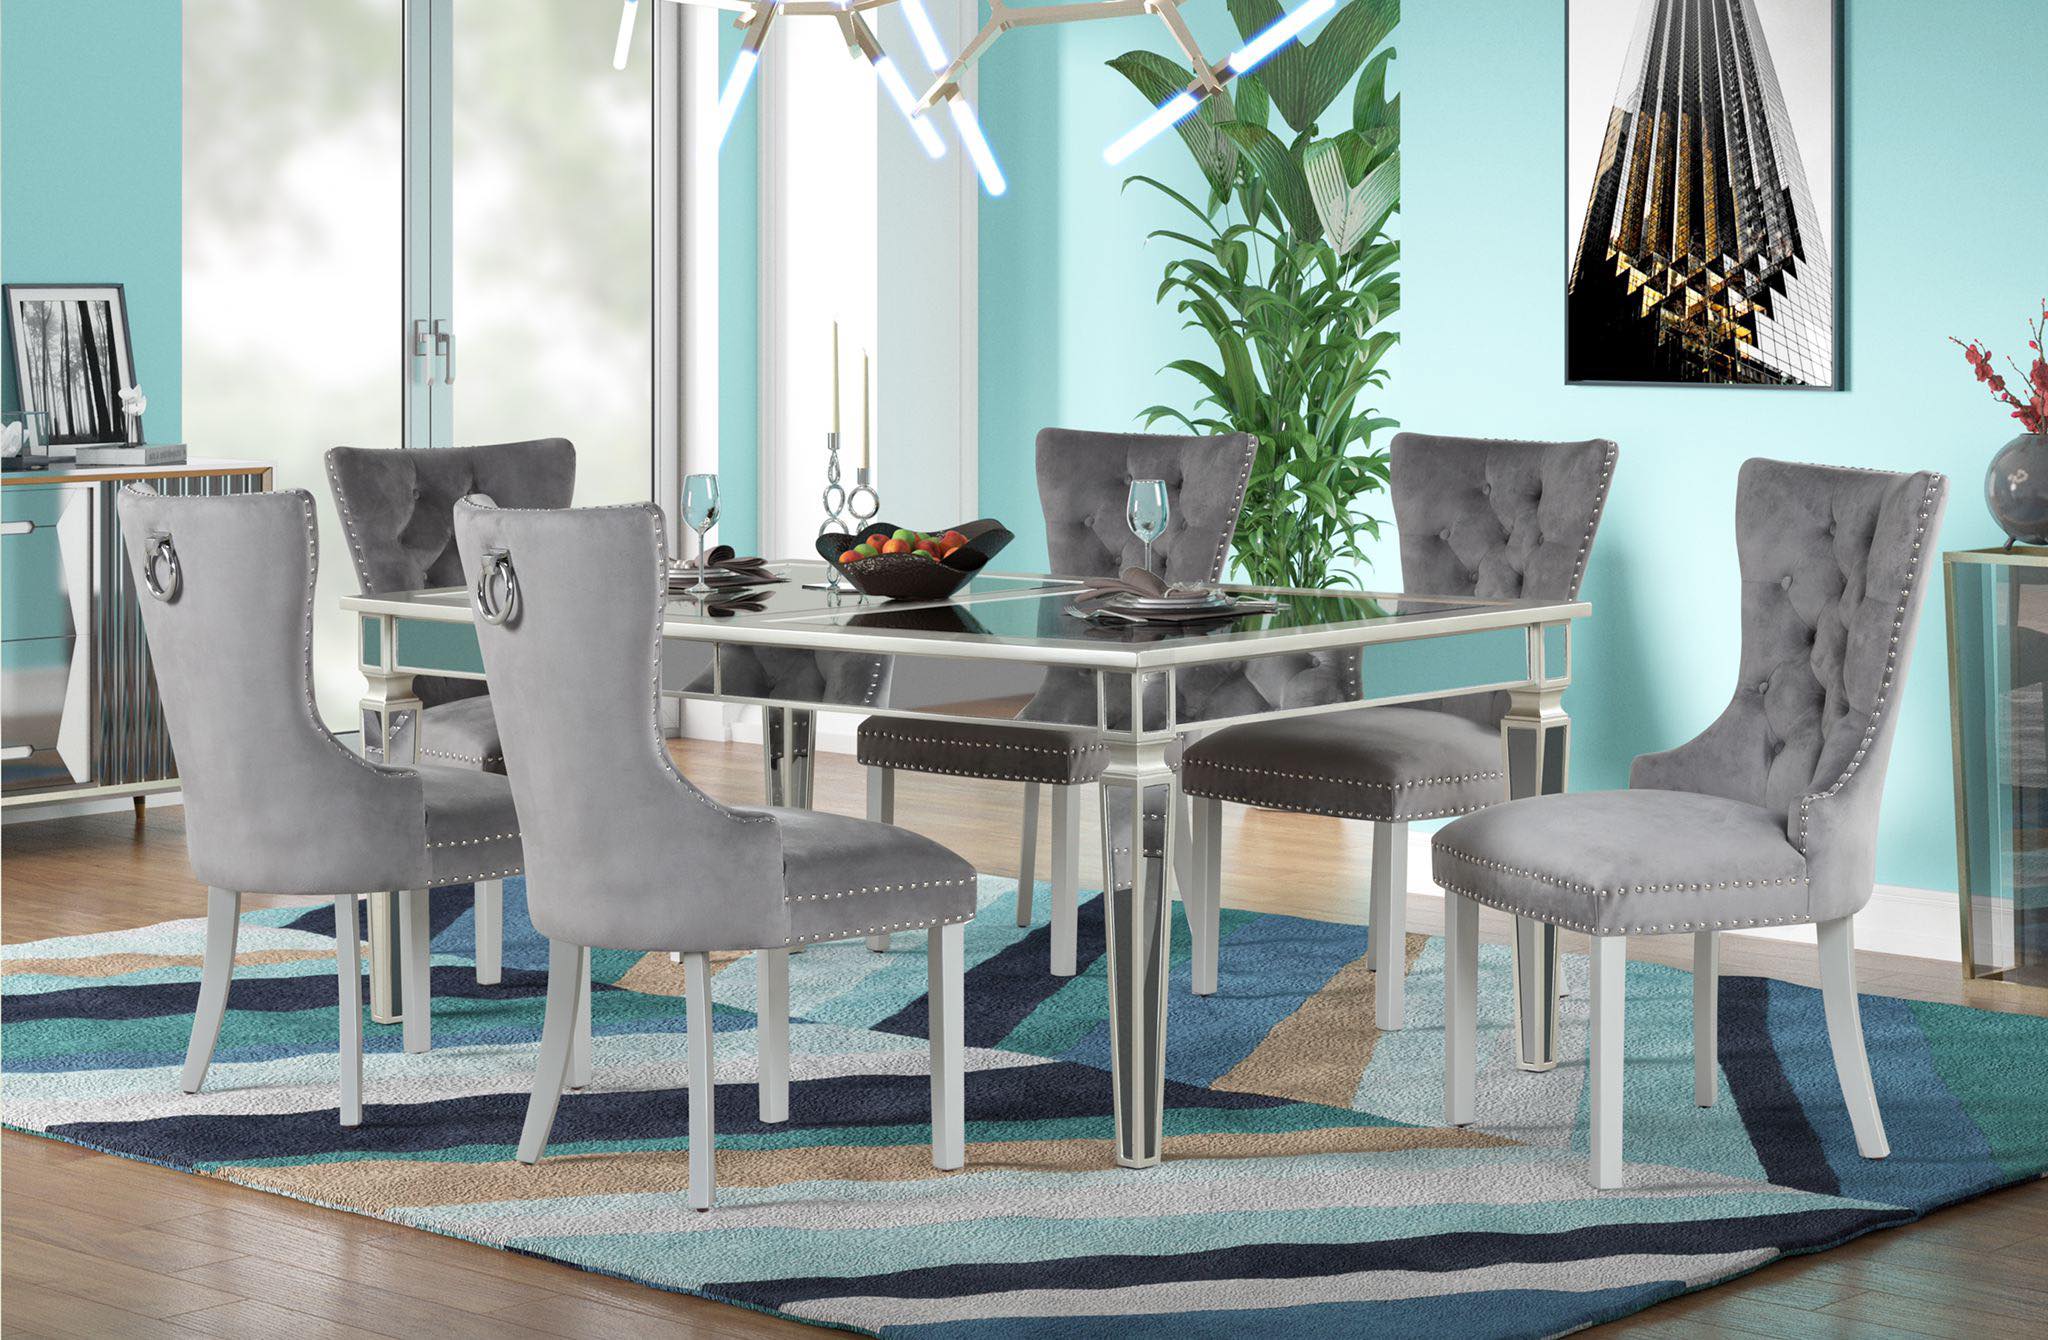 FANCY - MODERN 7 PC DINING SET WITH MIRROR INSERTS AND VELVET CHAIRS